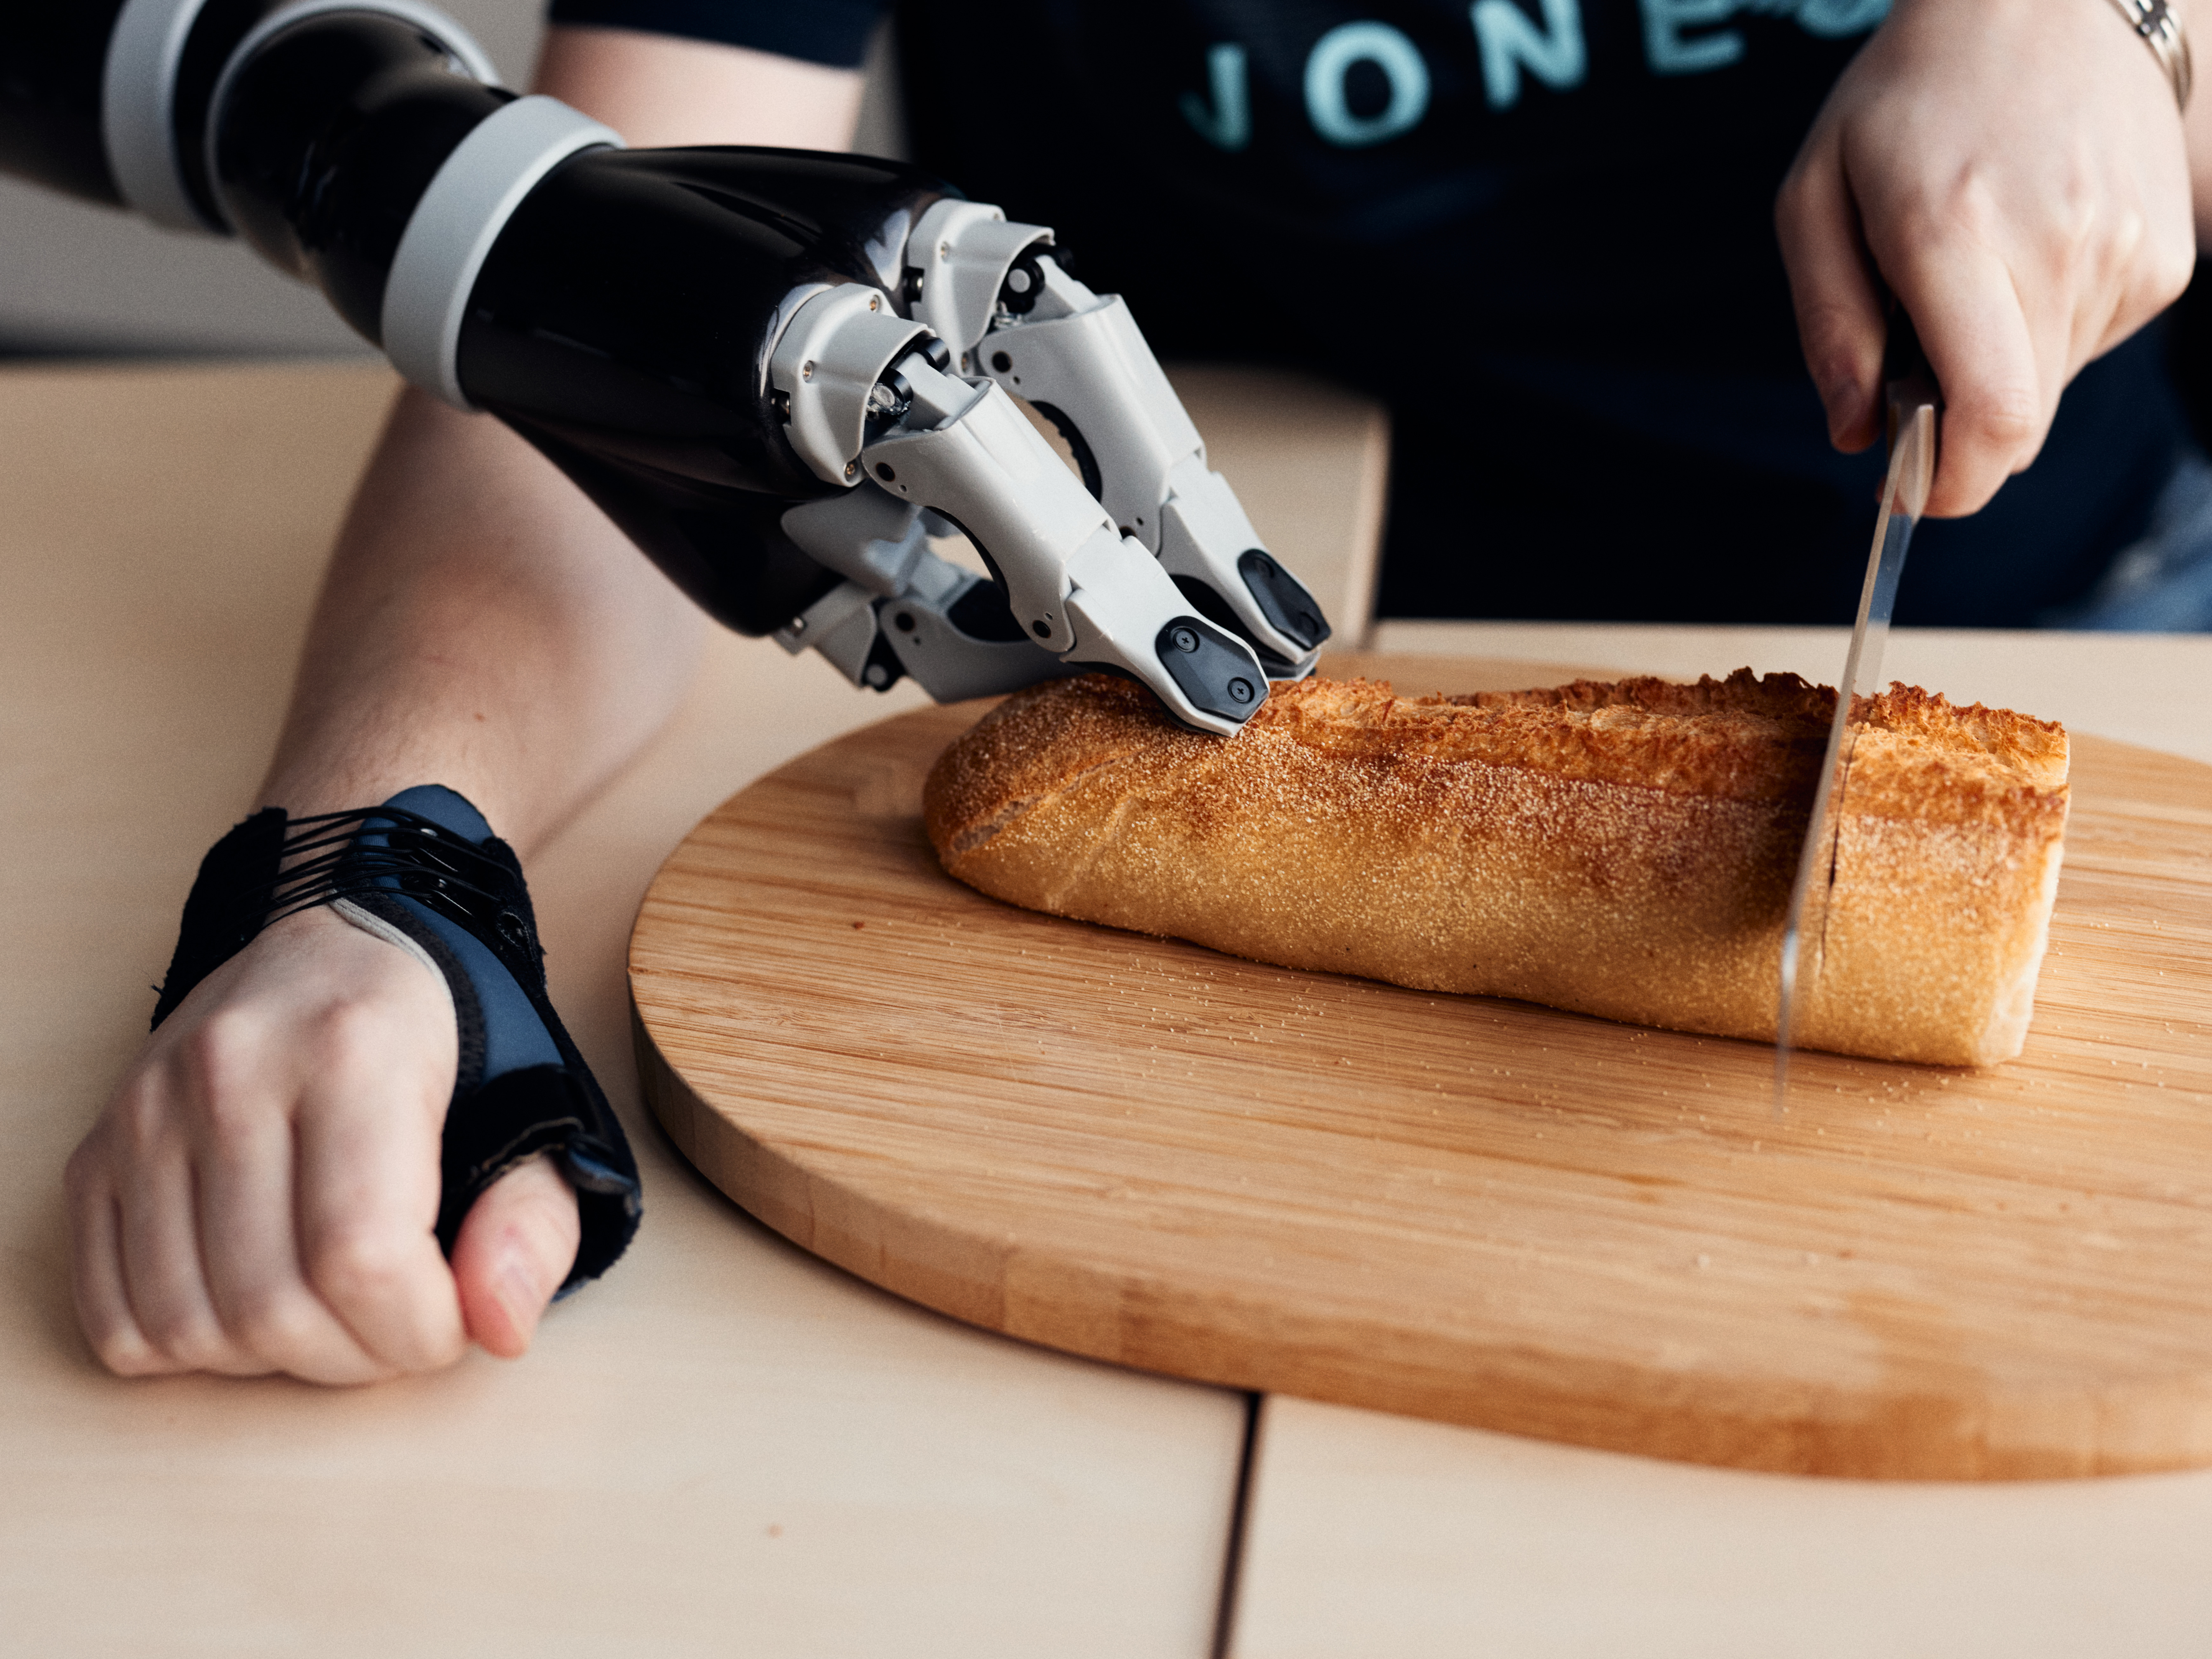 Robot arm holds bread to be cut